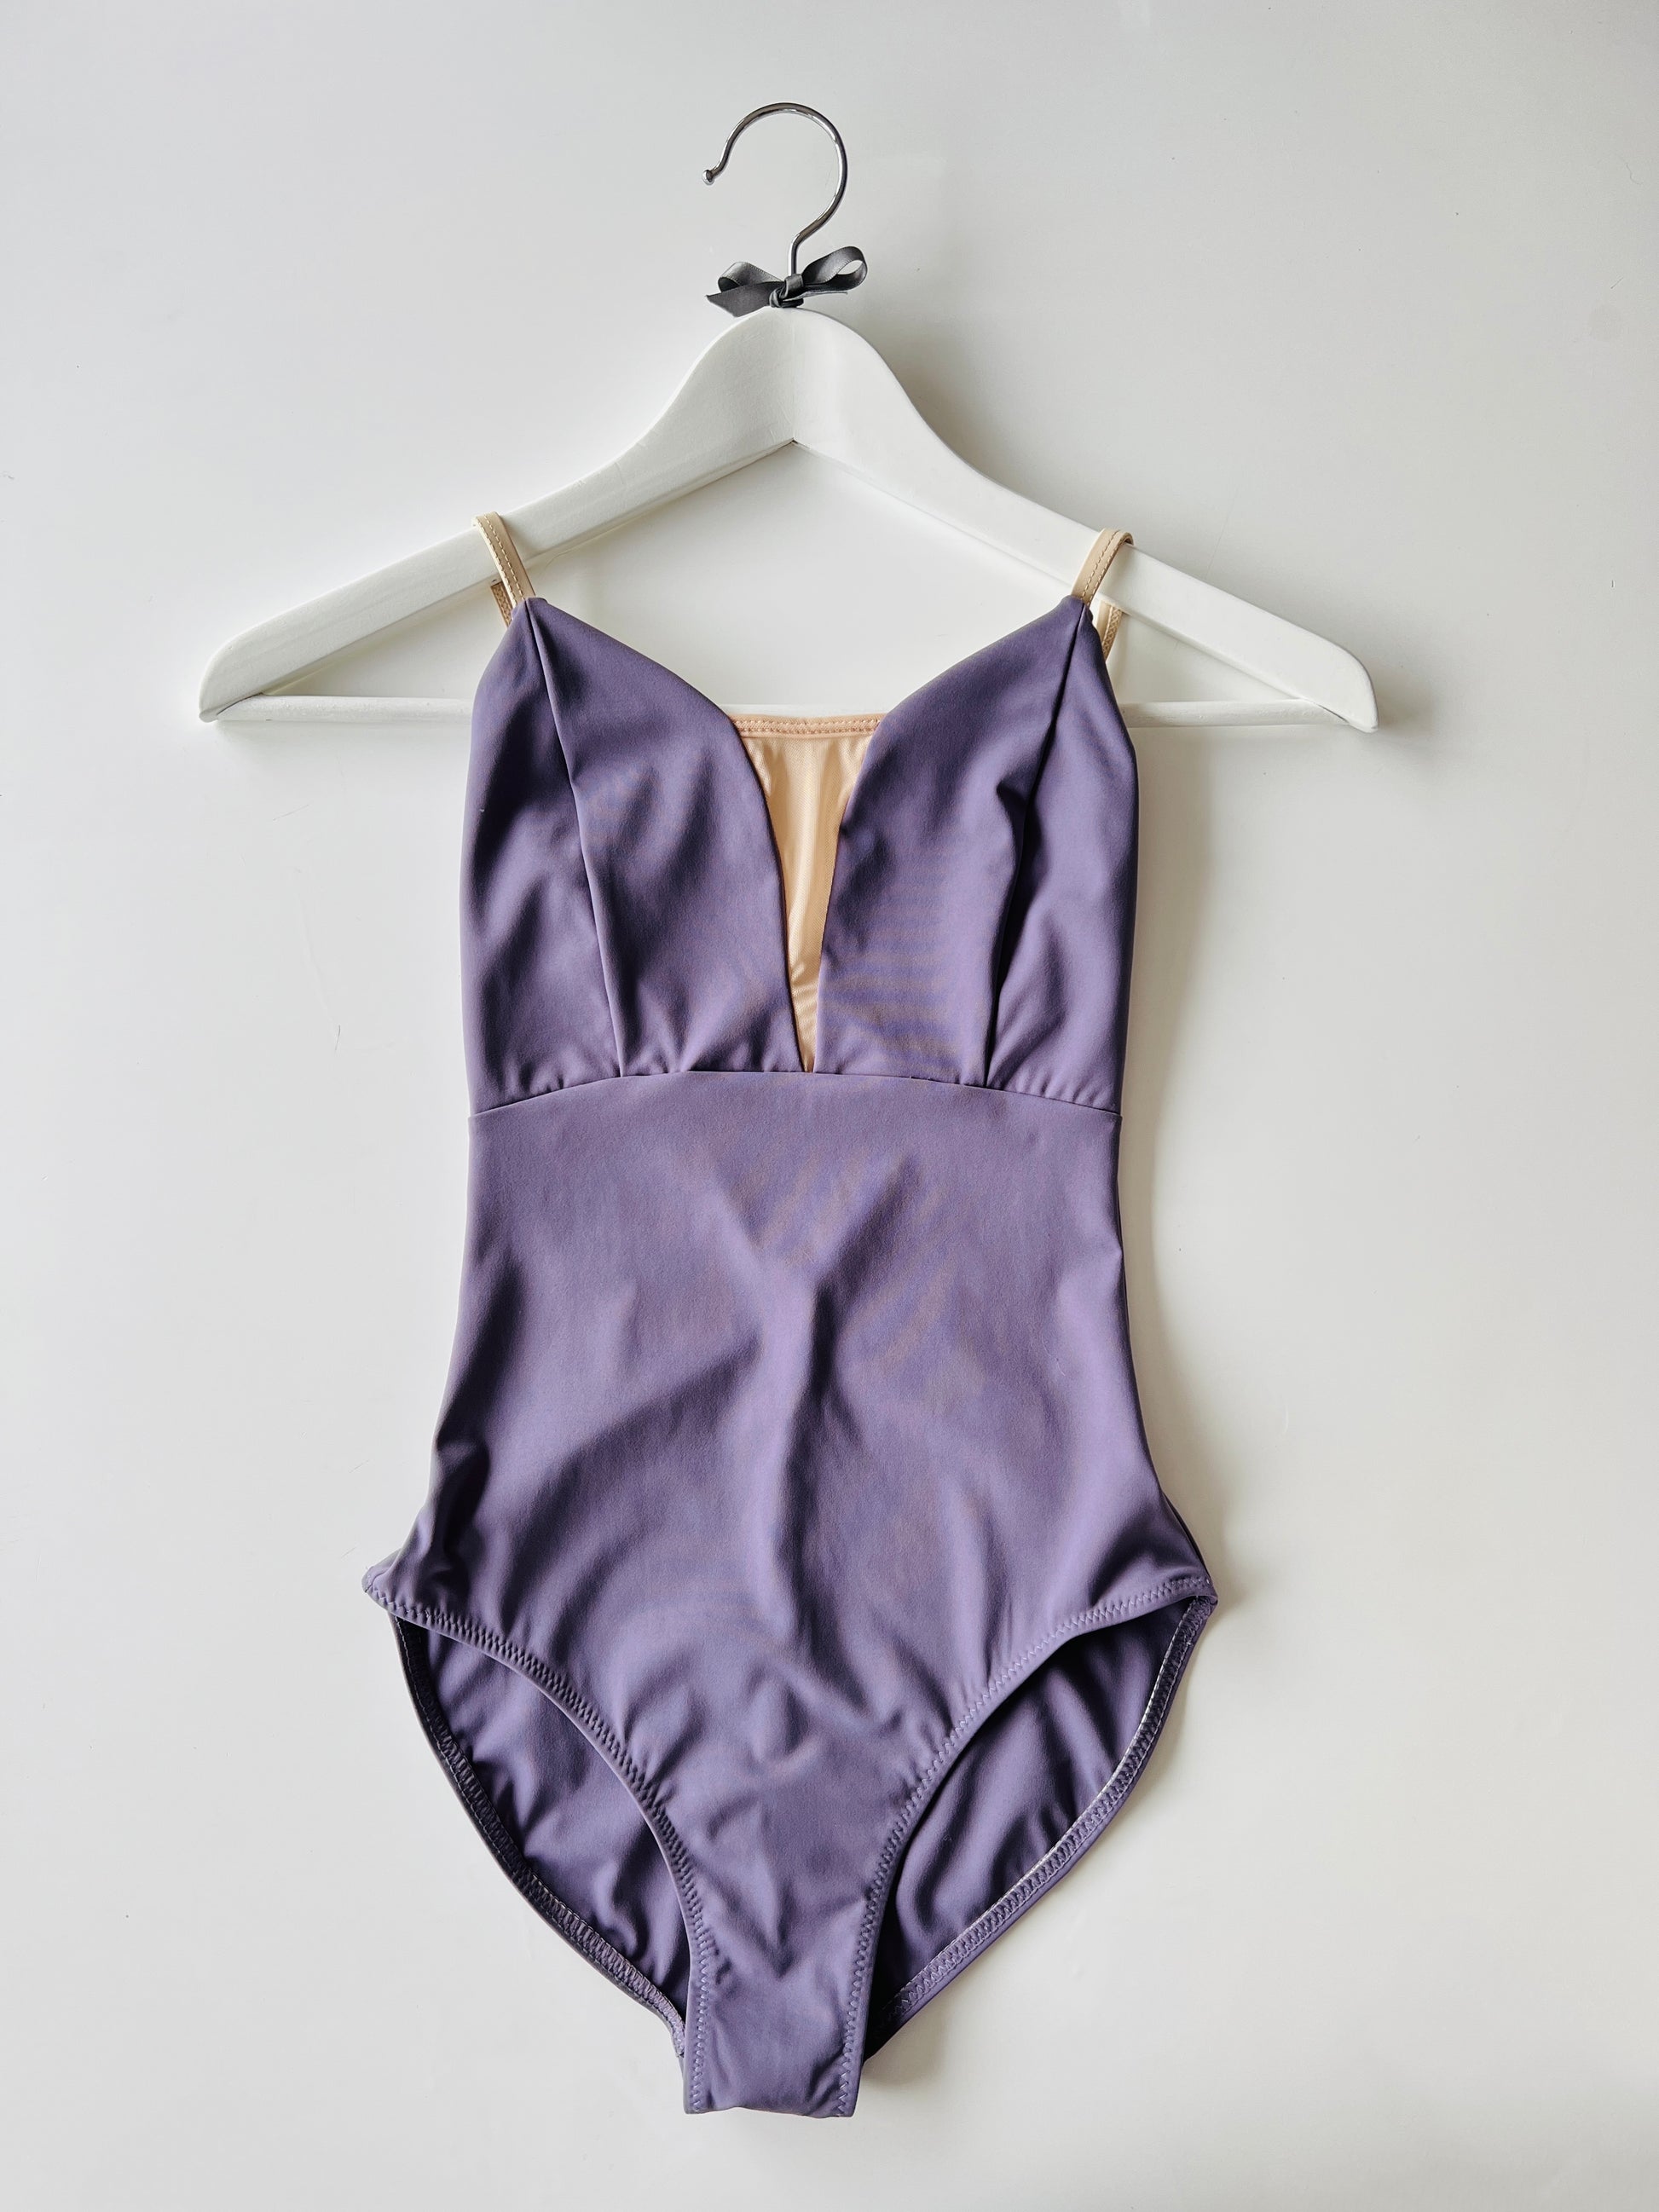 V mesh camisole ballet leotard in purple from The Collective Dancewear 